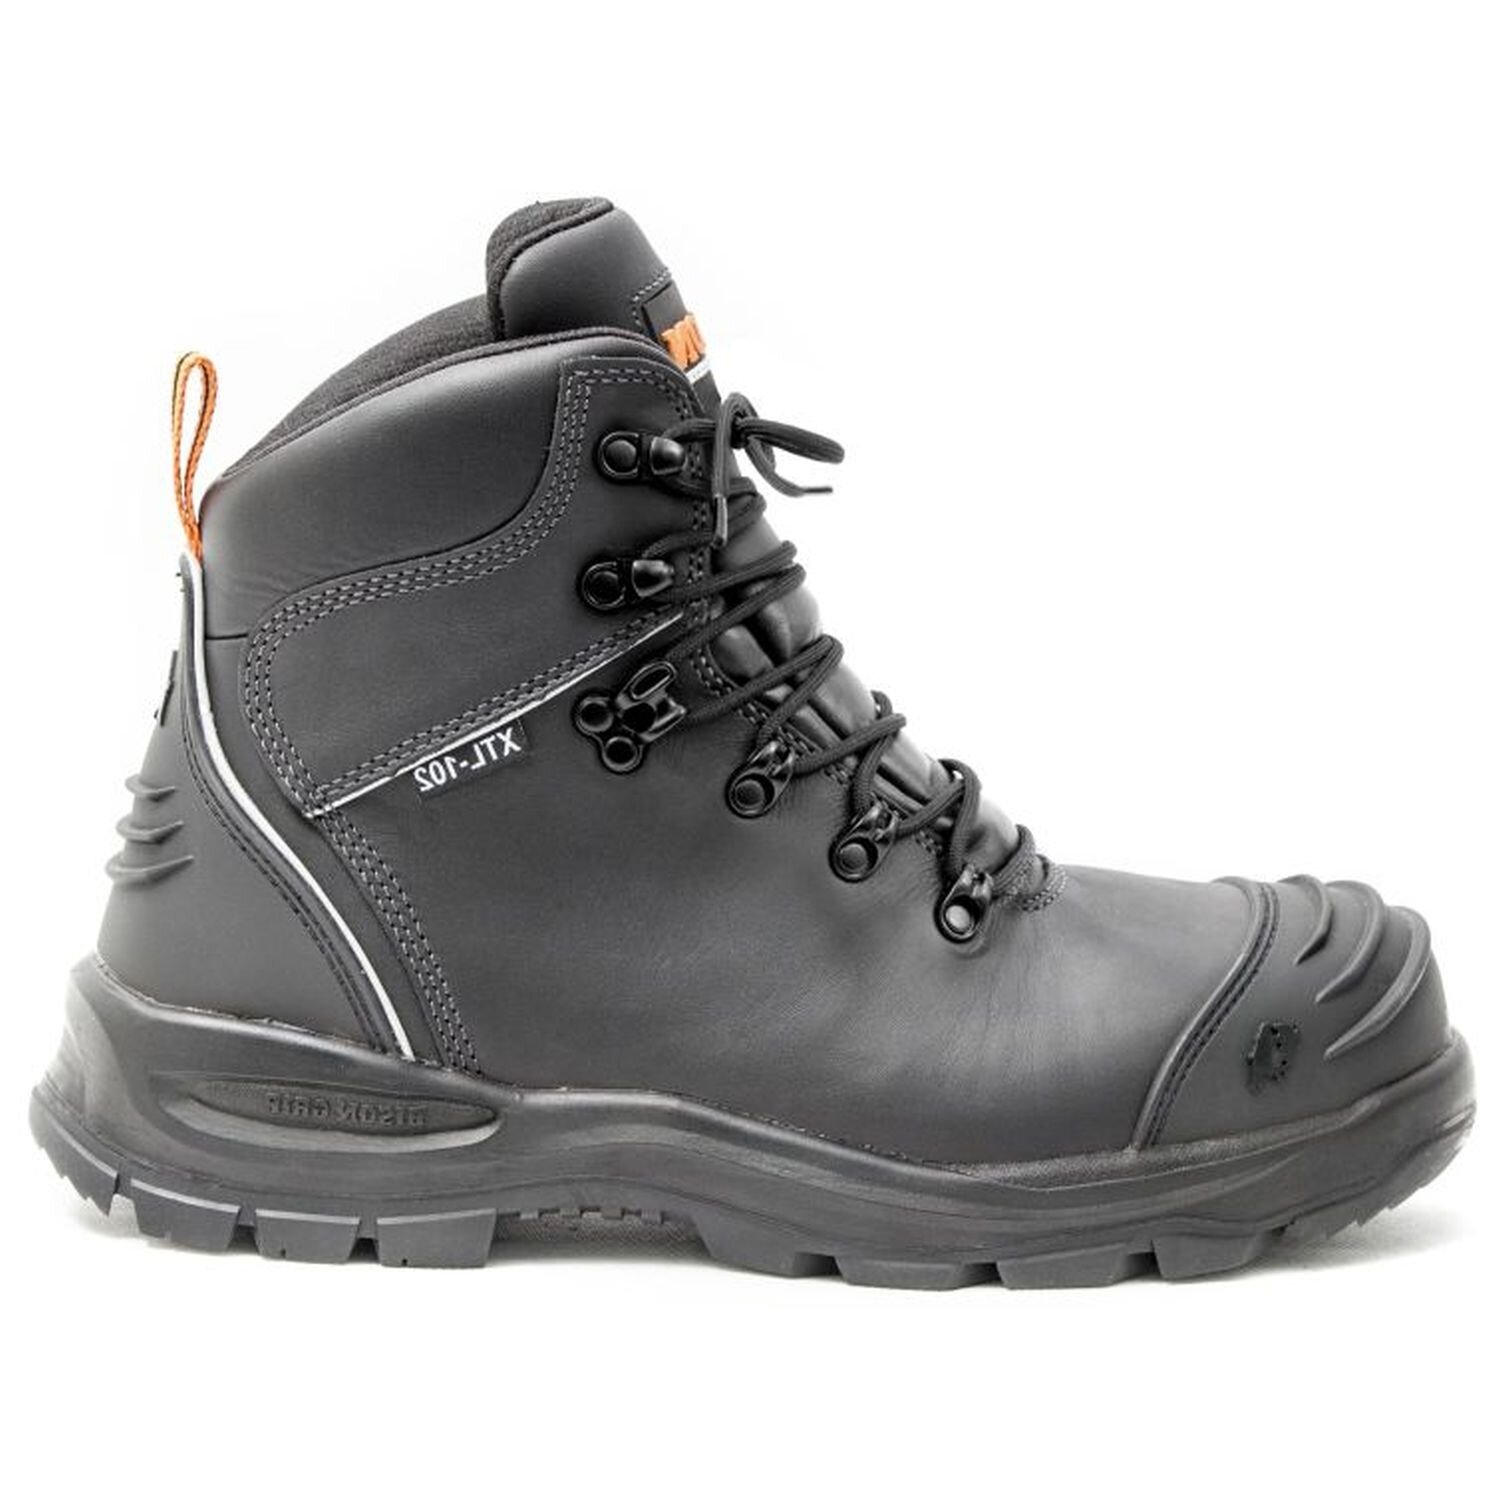 Bison Extreme Ankle Lace Up Safety Boot with Scuff Cap Black